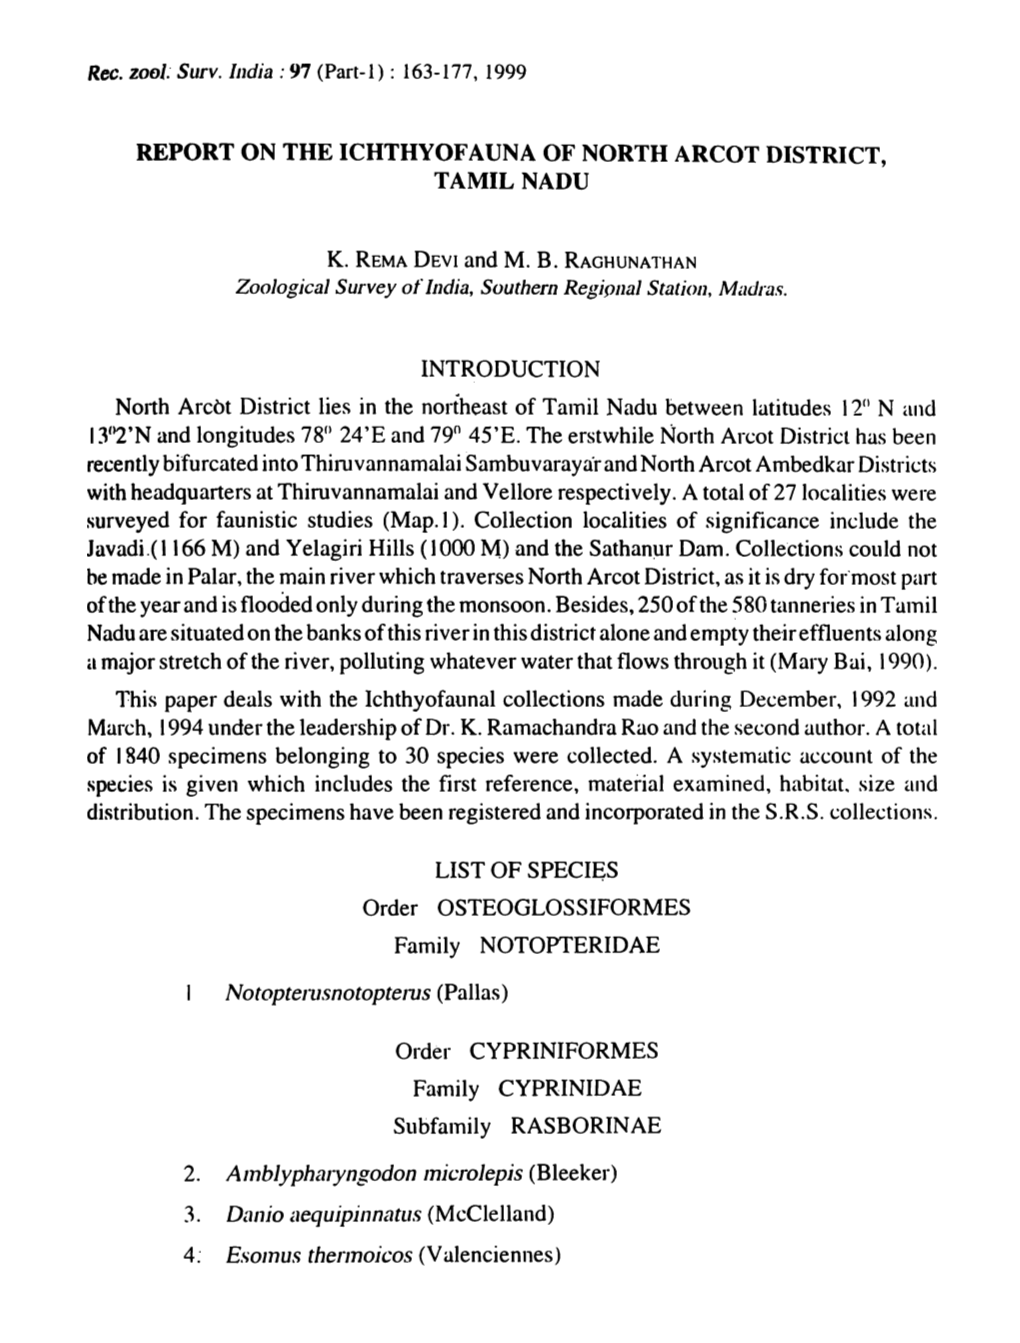 Report on the Ichthyofauna of North Arcot District, Tamilnadu